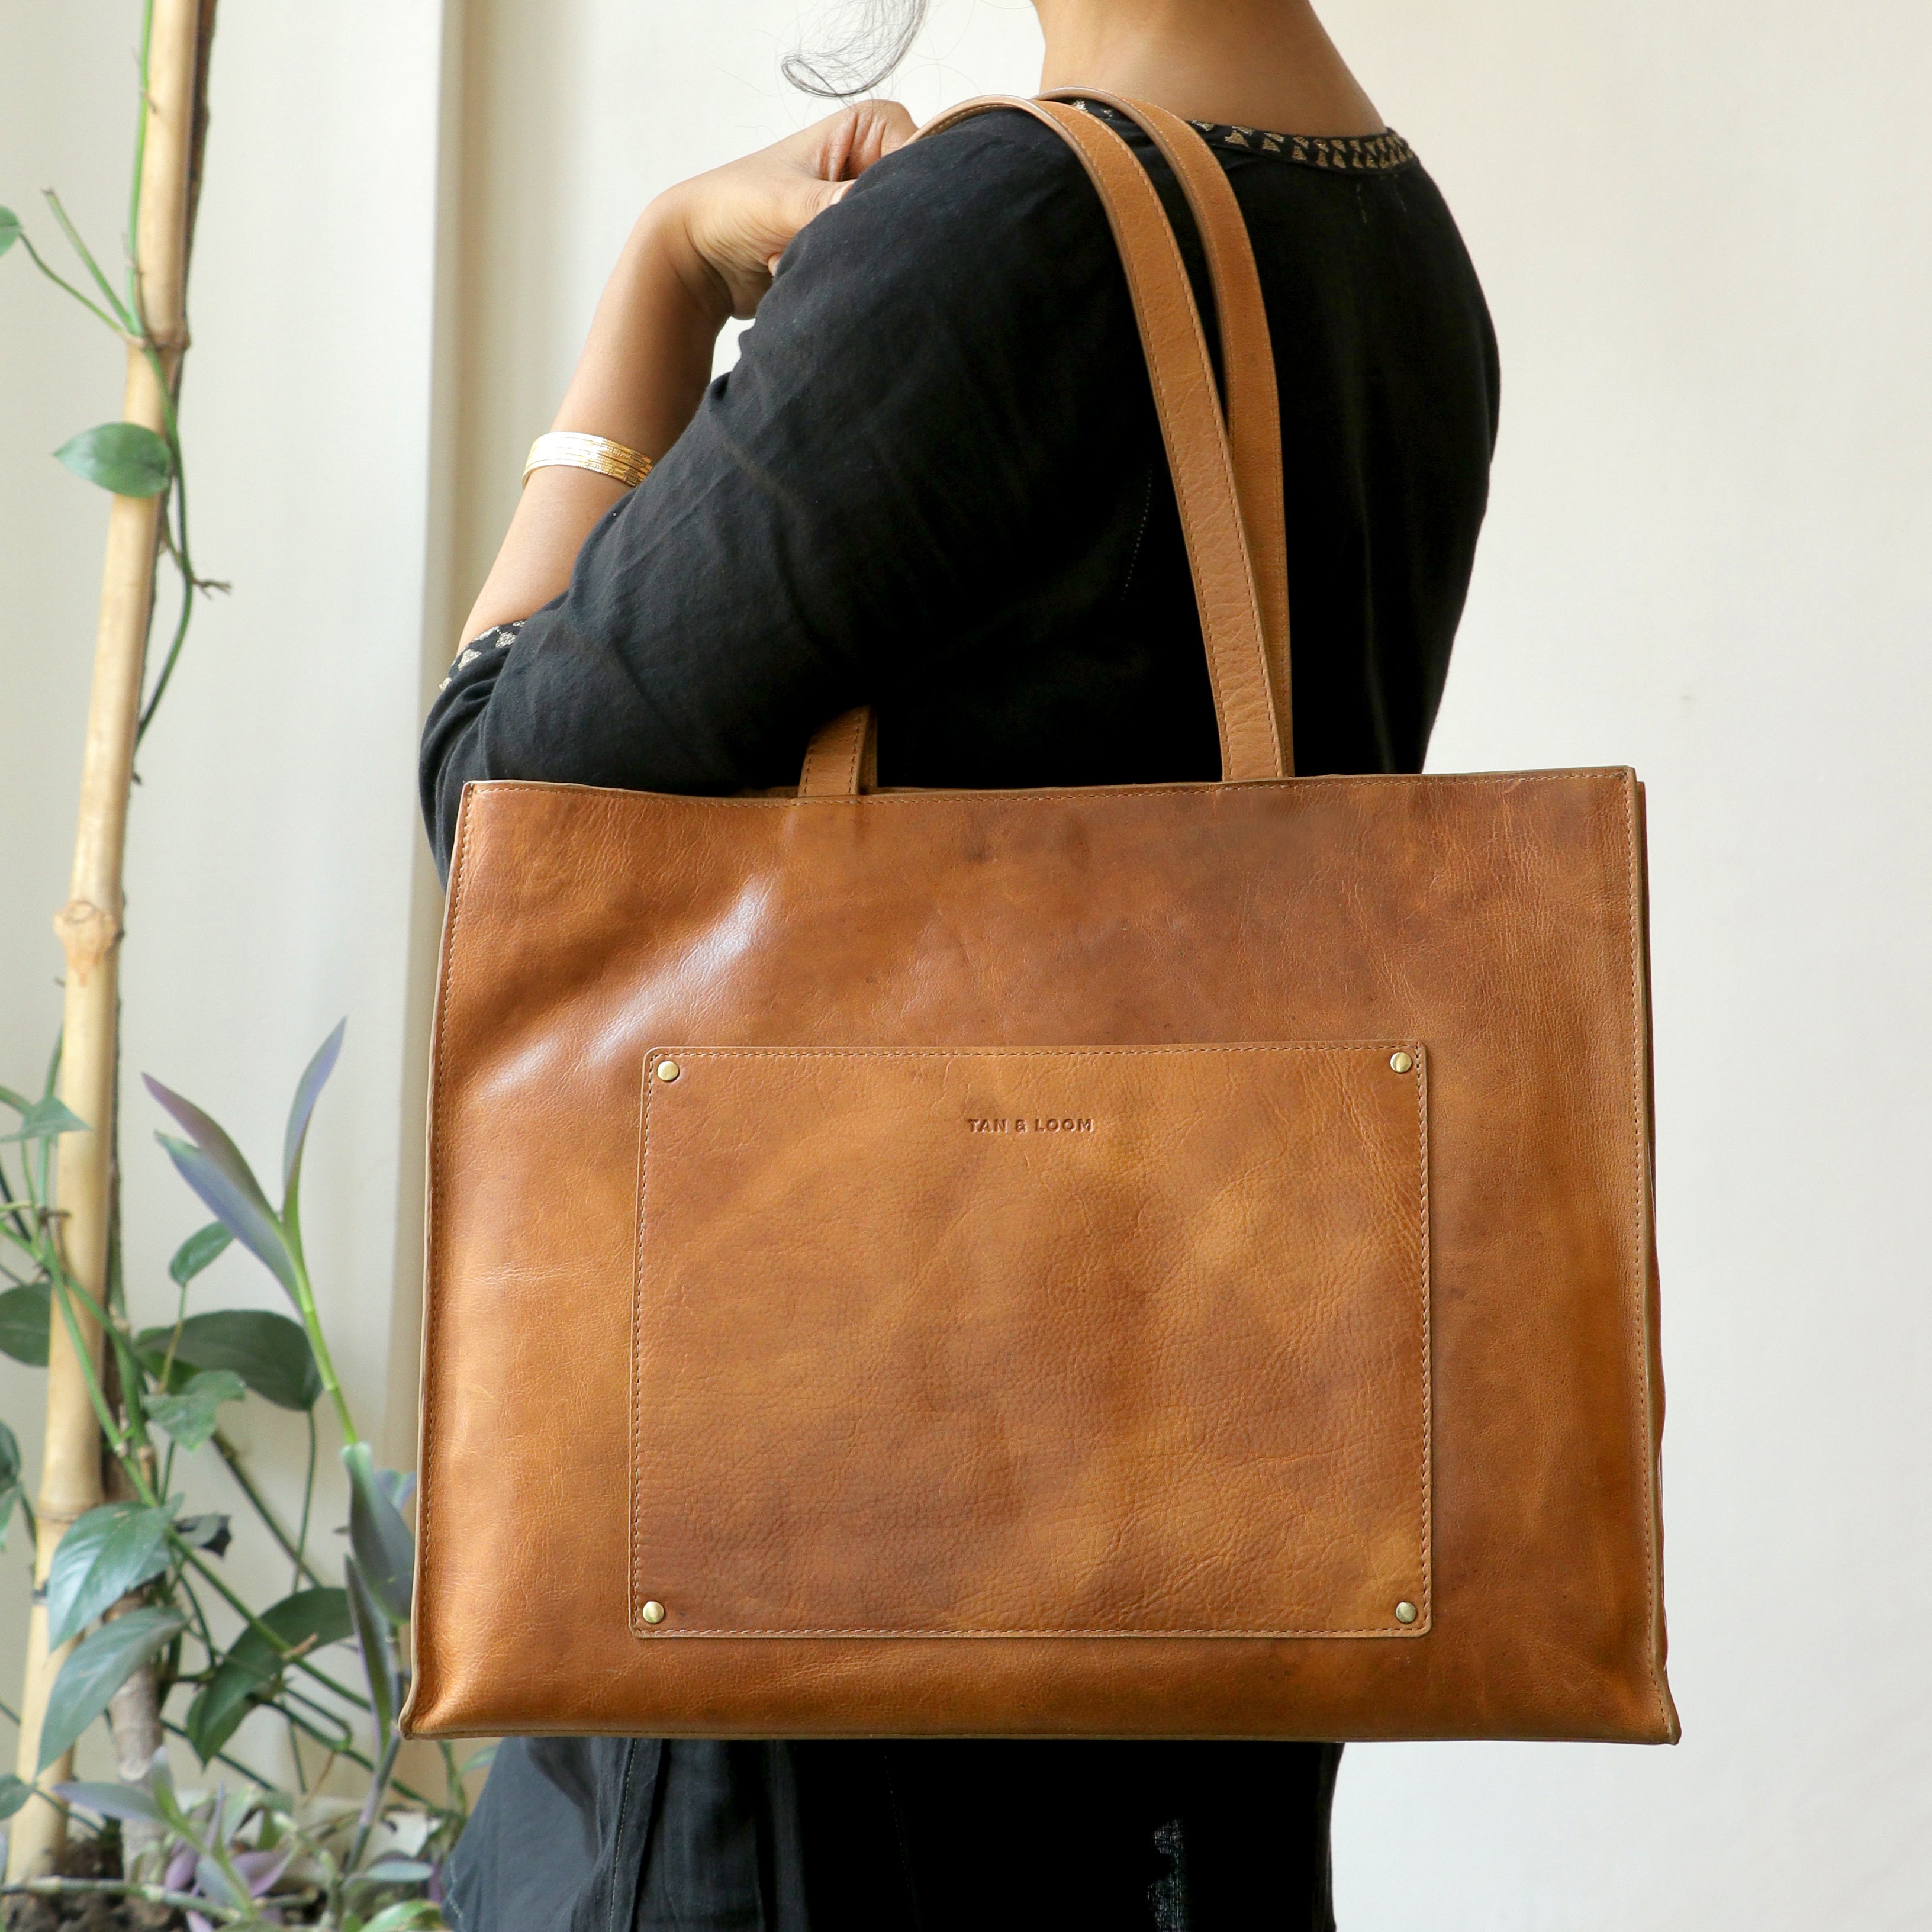 Handcrafted Genuine Vegetable Tanned Leather Artist's Tote Tuscany Tan for Women Tan & Loom